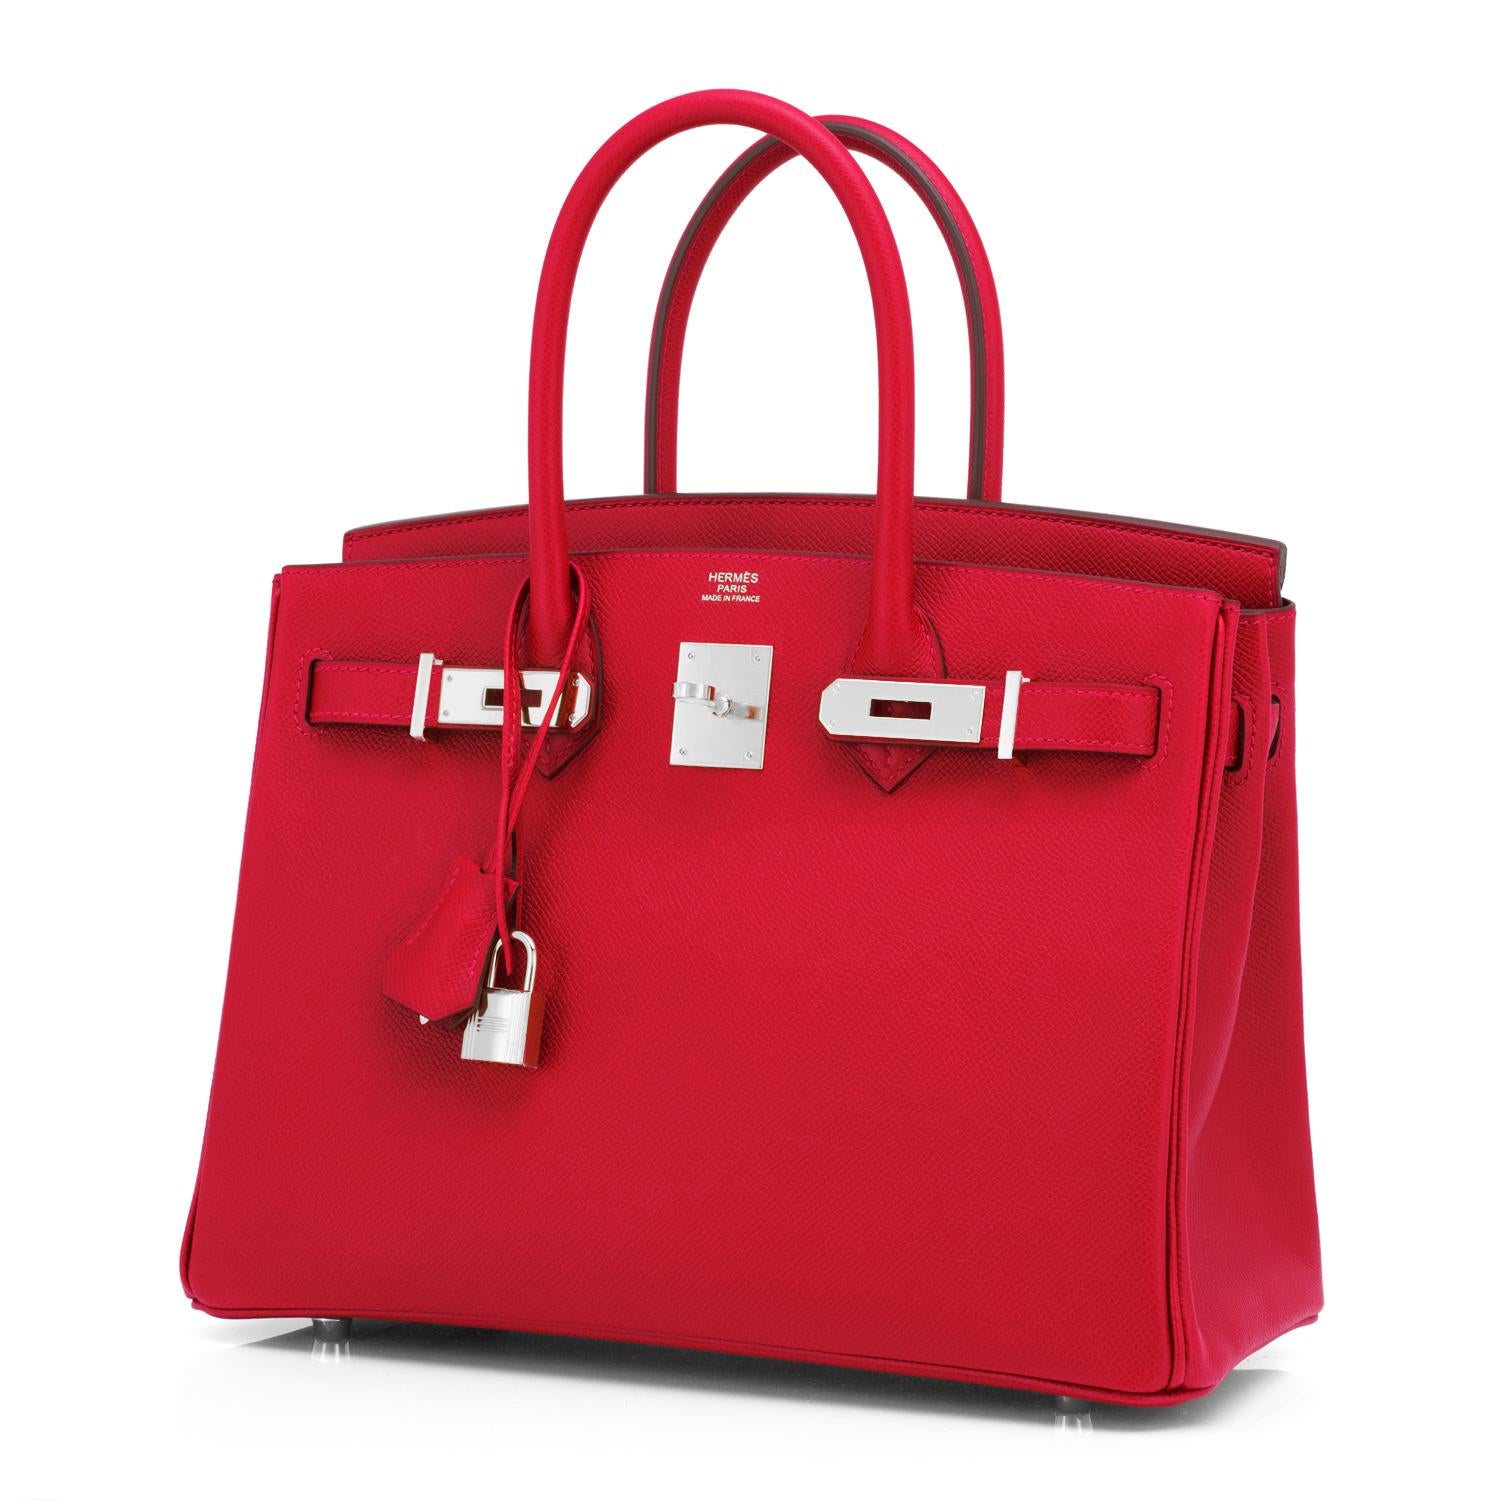 Guaranteed Authentic Hermes Birkin Bag 30cm Rouge Casaque Epsom Palladium Hardware Y Stamp, 2020
Brand New in Box. Store fresh. Pristine condition (with plastic on hardware).
Just purchased from Hermes store; bag bears new 2020 interior Y